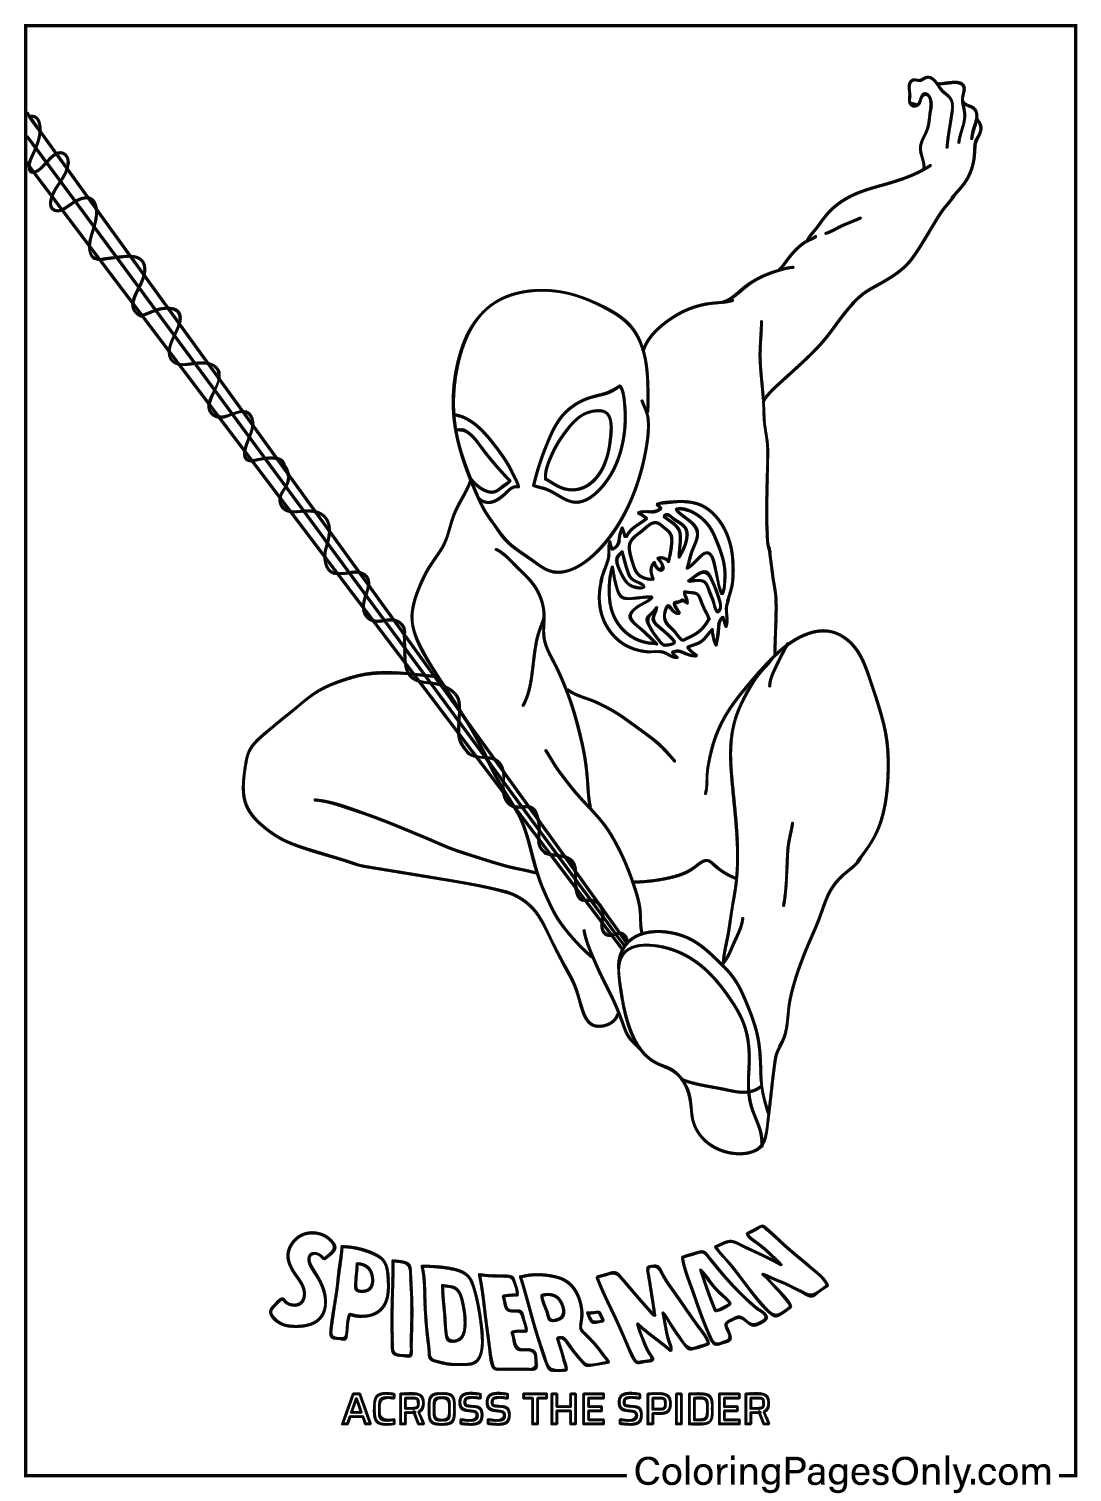 Spider-Man Across the Spider Coloring Page from Spider-Man: Across the Spider